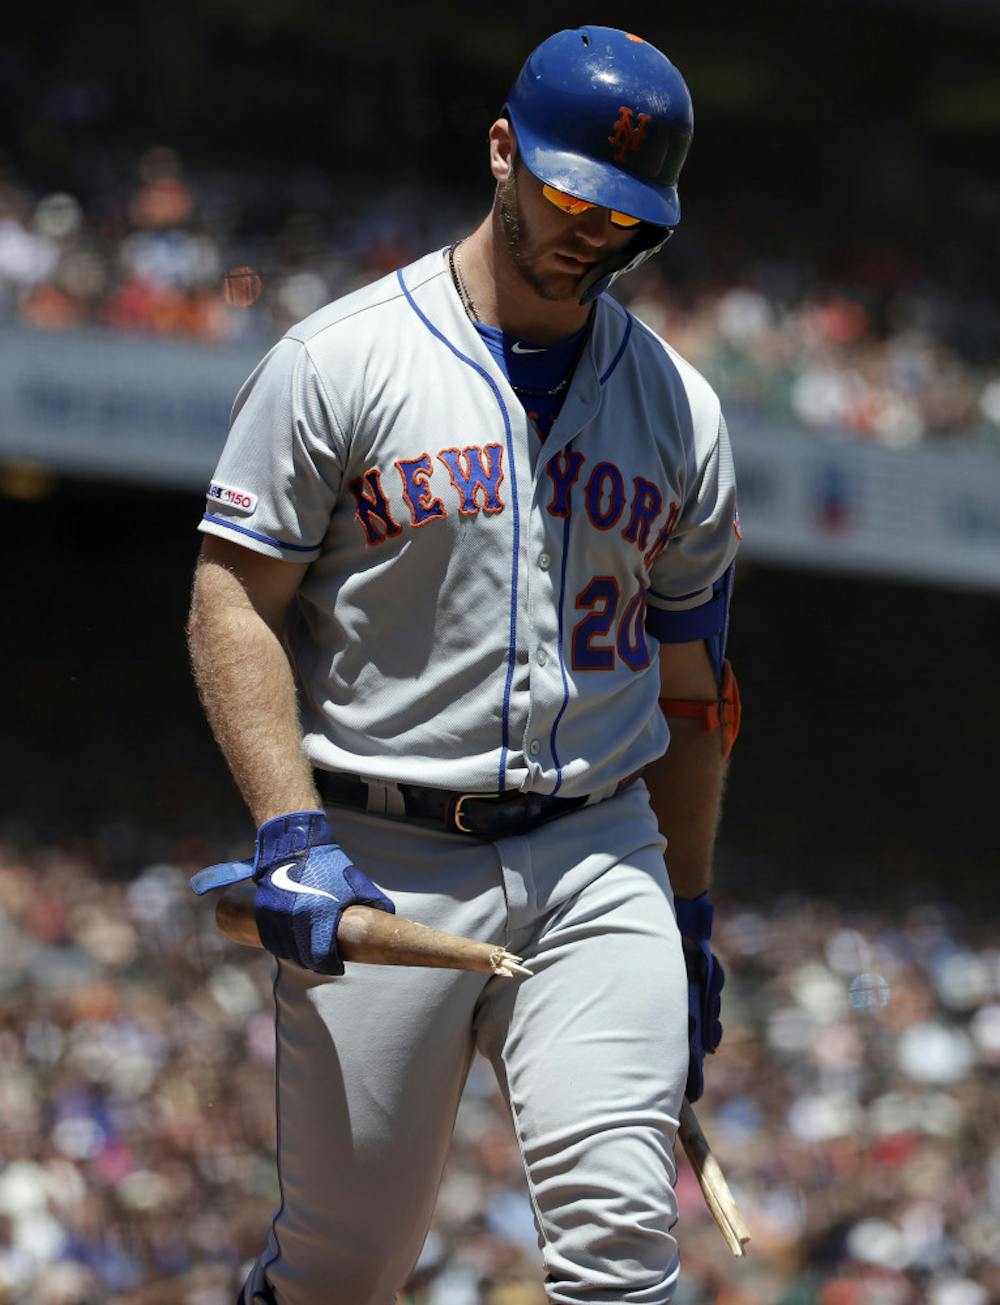 <p><span id="docs-internal-guid-1beb0f7a-7fff-cb9a-765a-2689f1f5ea1f"><span>Pete Alonso, one of the few bright spots of this Mets season, looks down in frustration after striking out earlier this month.</span></span></p>